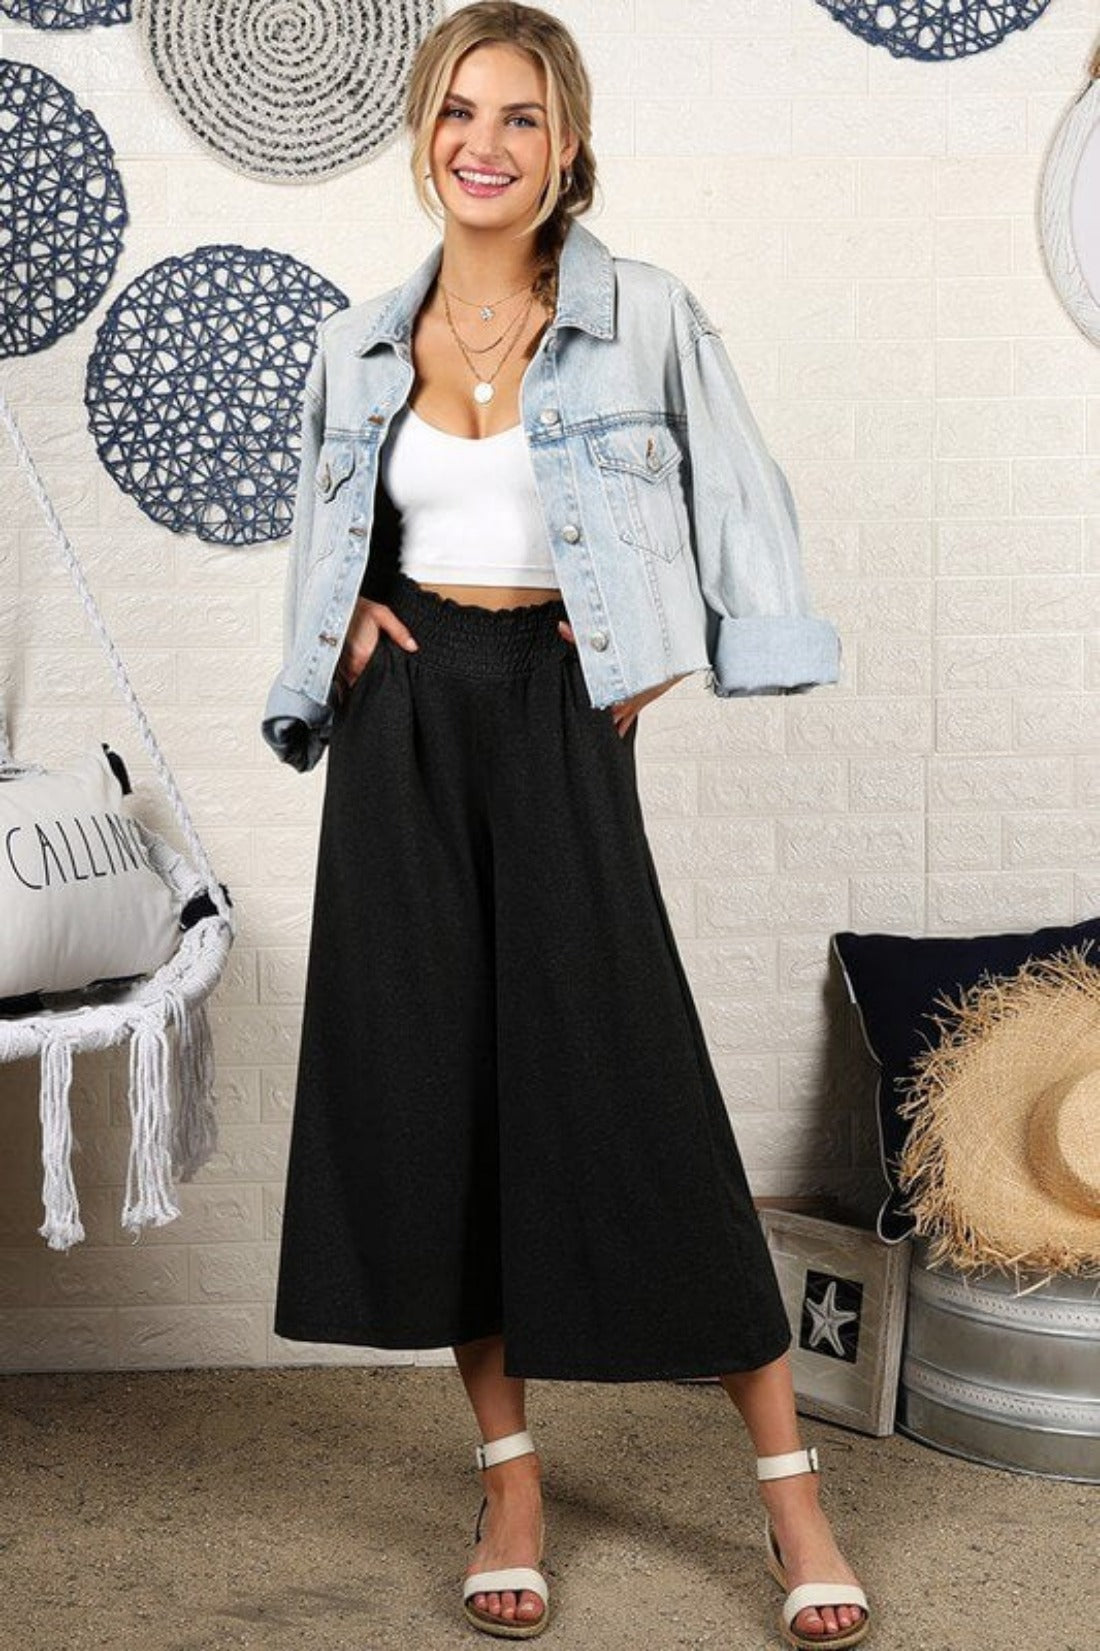 Why Gaucho Pants Are About To Be This Season's Hottest Item